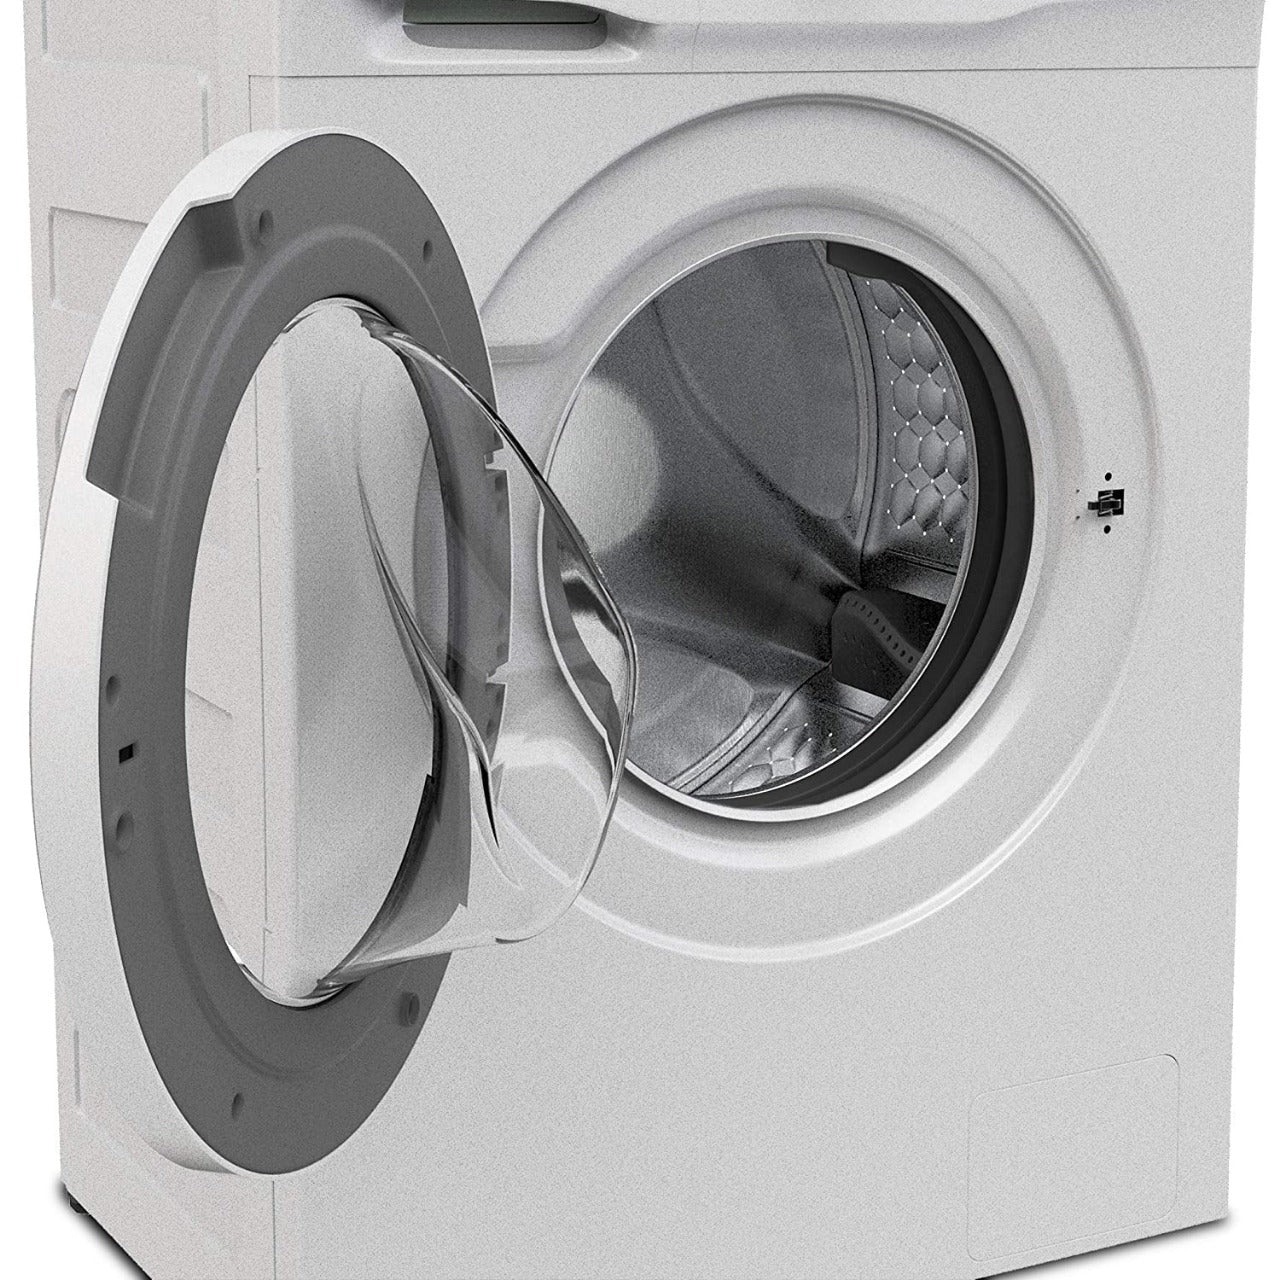 Open Box, Unused TCL 7 Kg Fully-Automatic Front Loading Washing Machine (TWF70-G123061A03(N), White)